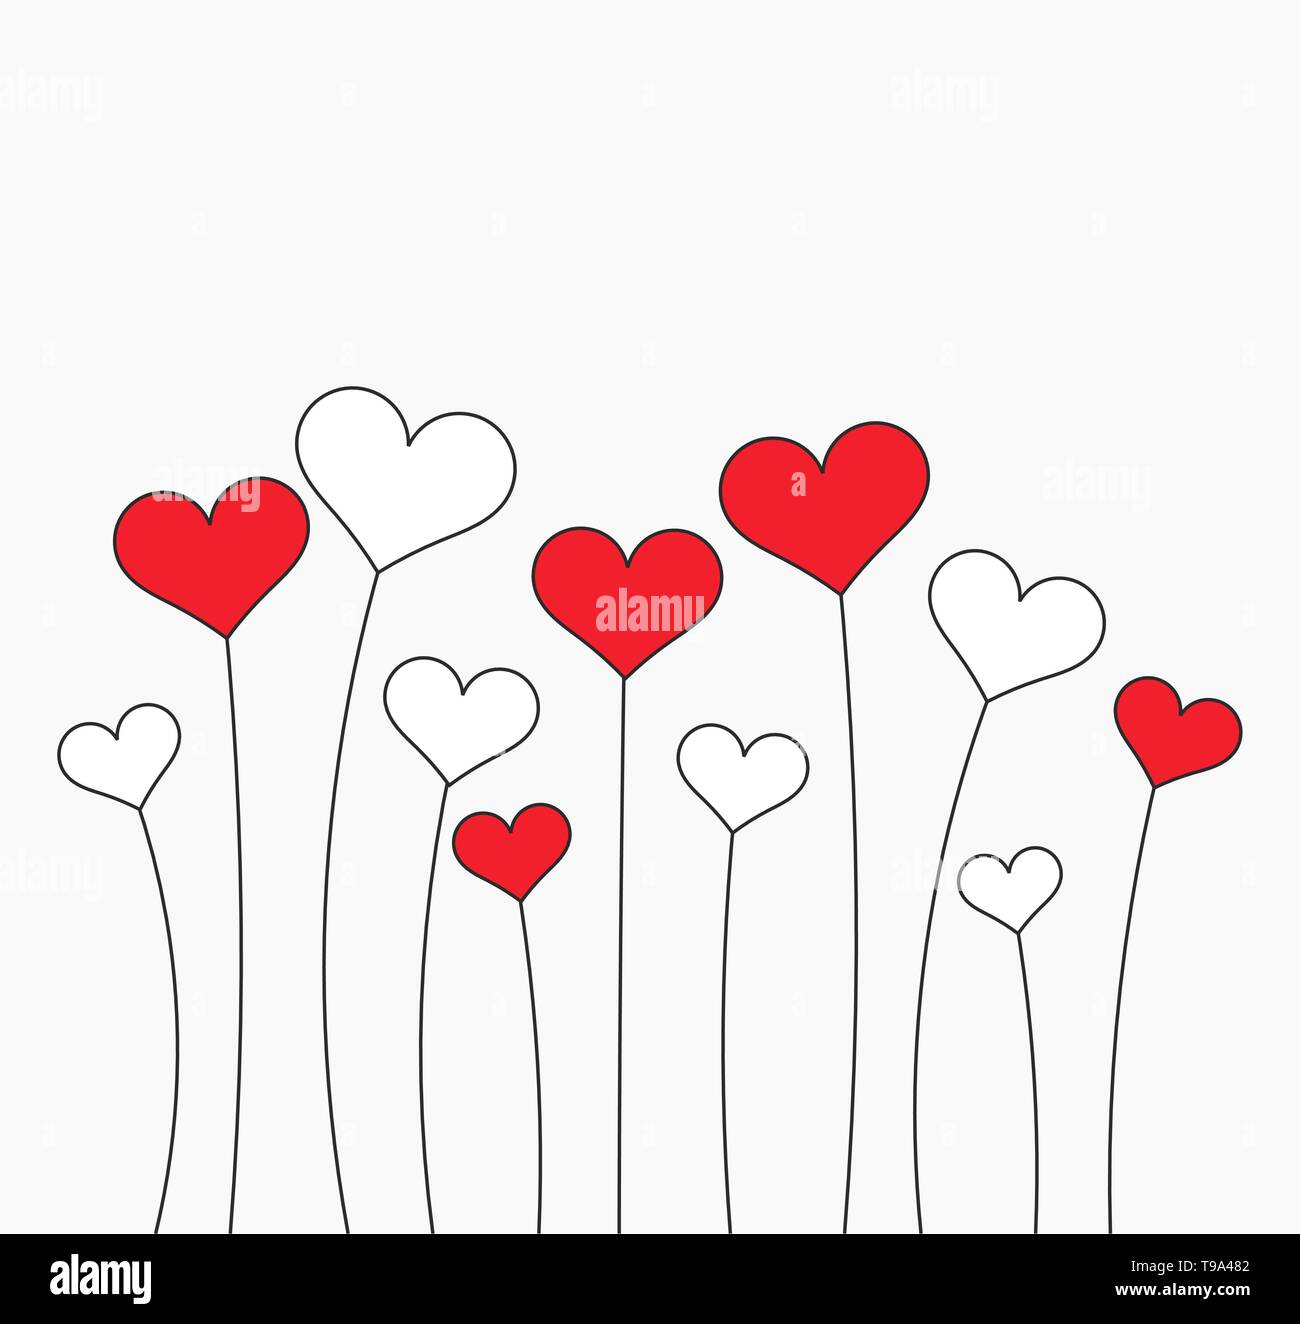 Cute Hearts Valentine S Day Background Vector Illustration Stock Vector Image Art Alamy